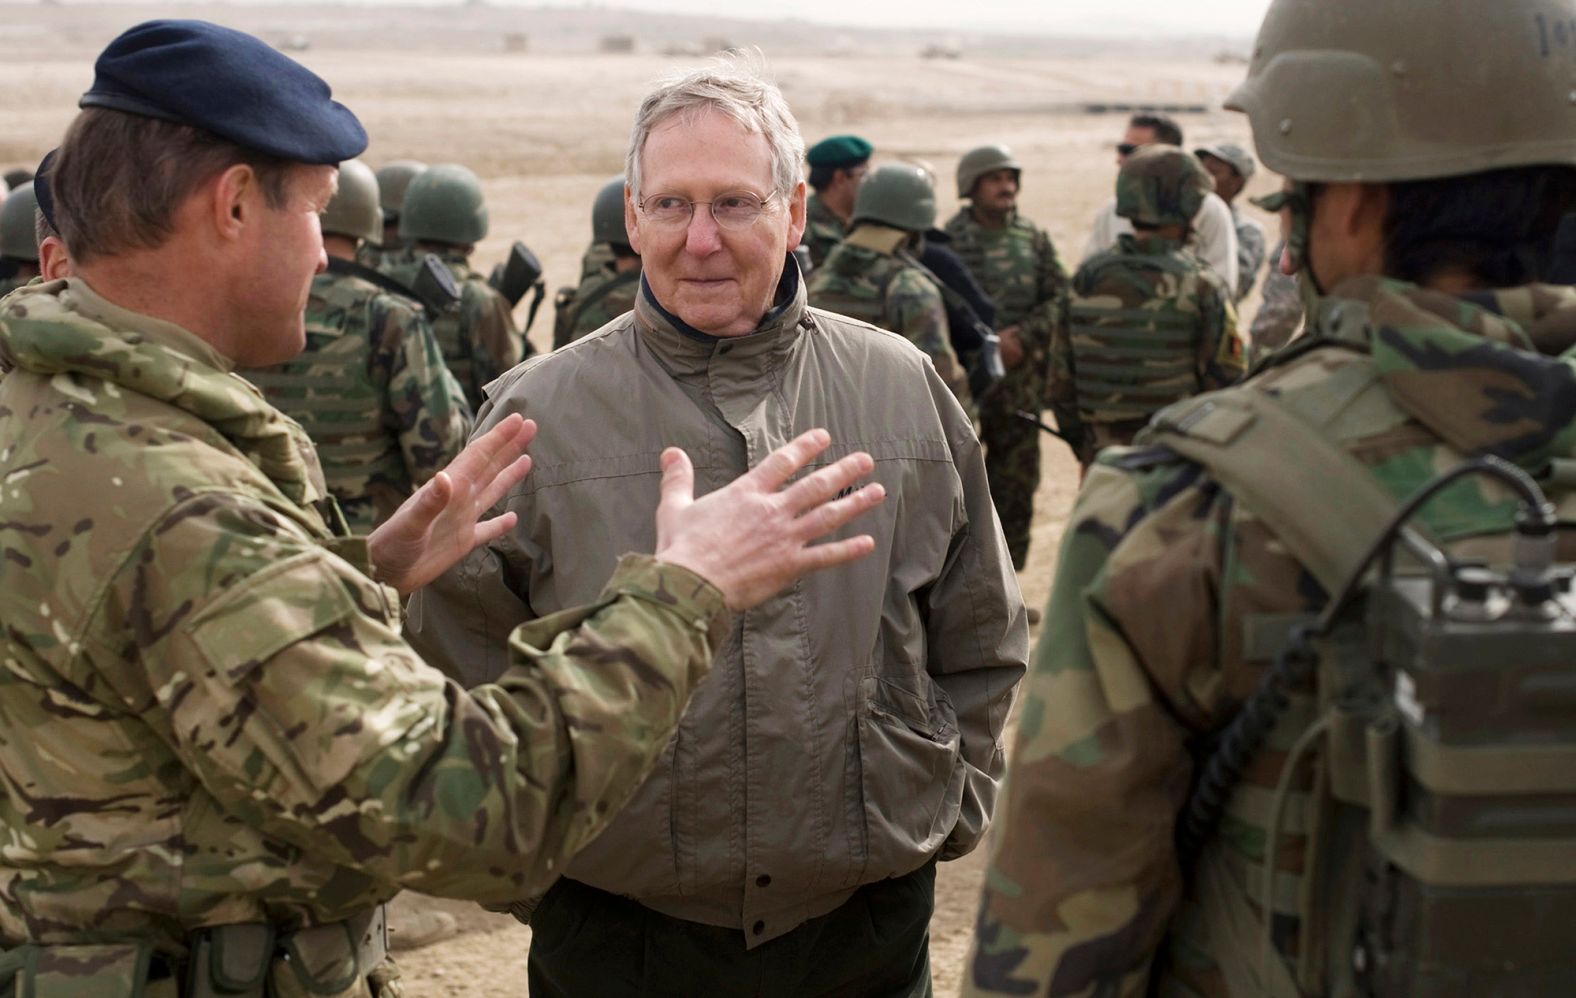 McConnell speaks to a NATO training mission adviser as he visits a military training cernter in Kabul, Afghanistan, in January 2011.